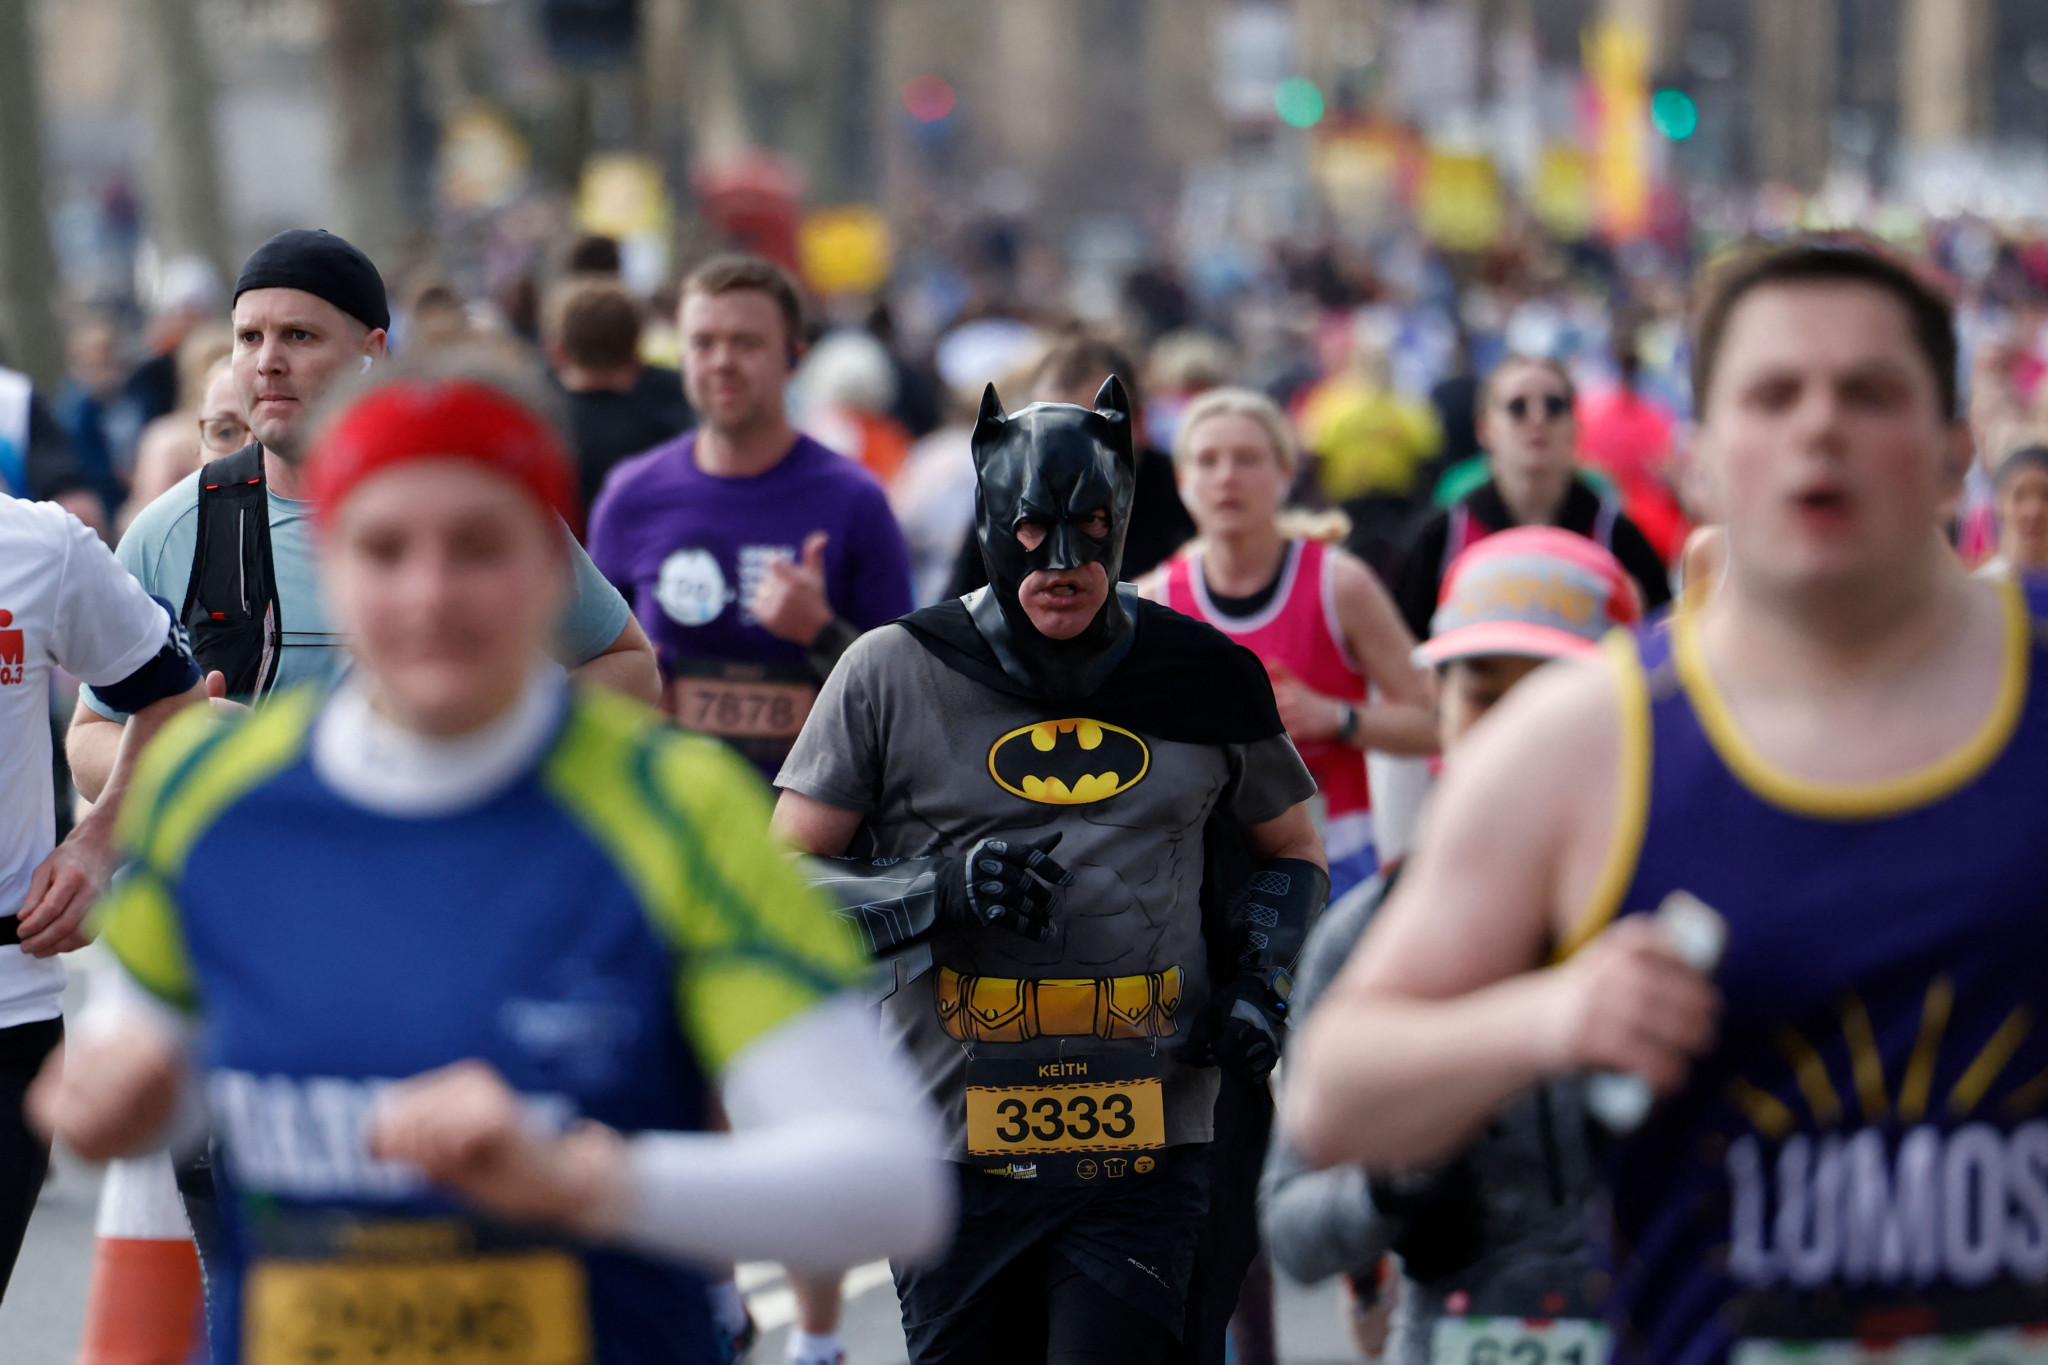 A man dressed as Gotham's vigilante hero Batman was among the runners ©Getty Images 